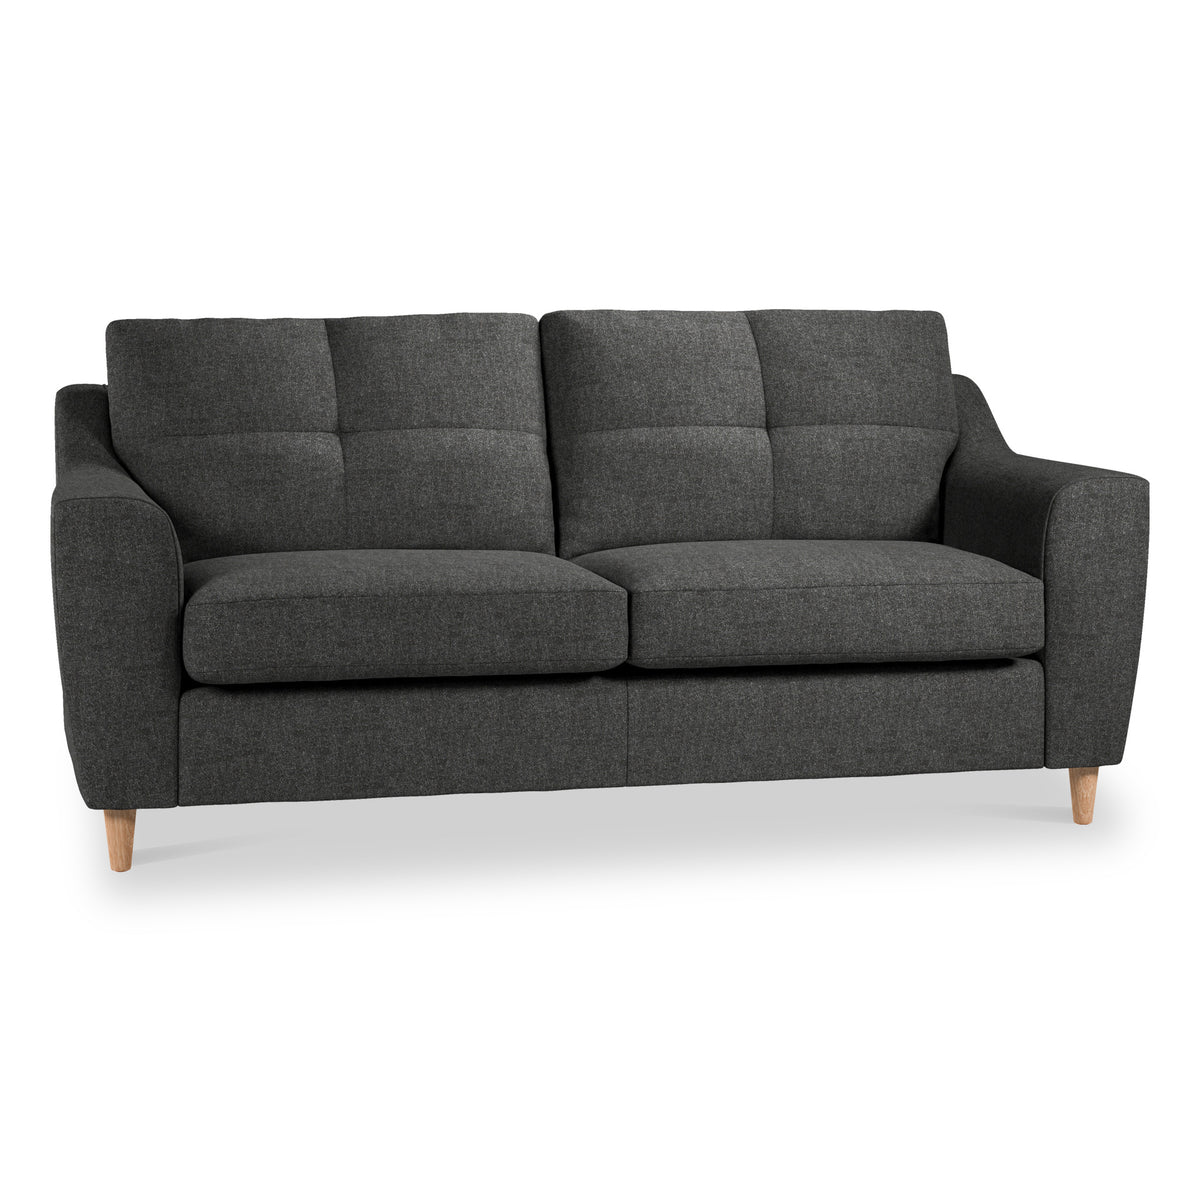 Justin Charcoal 3 Seater Sofa from Roseland Furniture